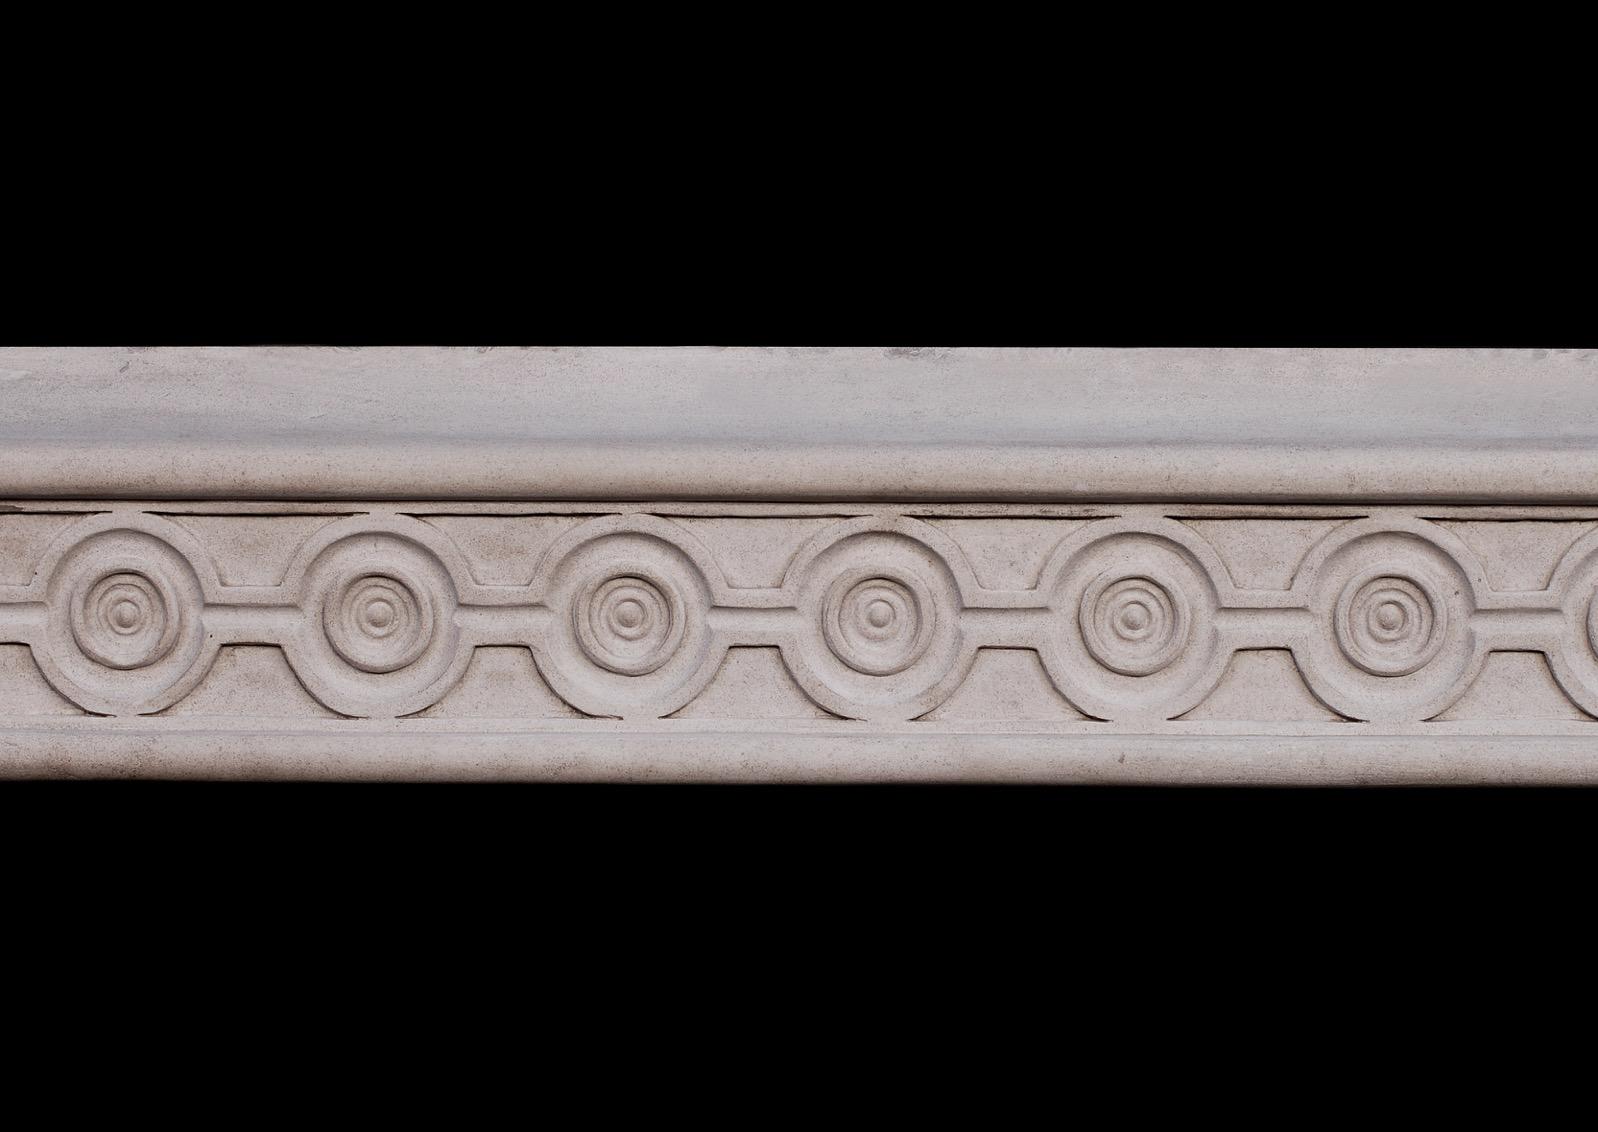 An attractive English limestone fireplace. The frieze and jambs with guilloche carving and scotia moulding to outside. With additional shelf. A Fine architectural piece. Modern.

Measures: 
Shelf width: 1435 mm / 56 1/2 in
Overall height: 1175